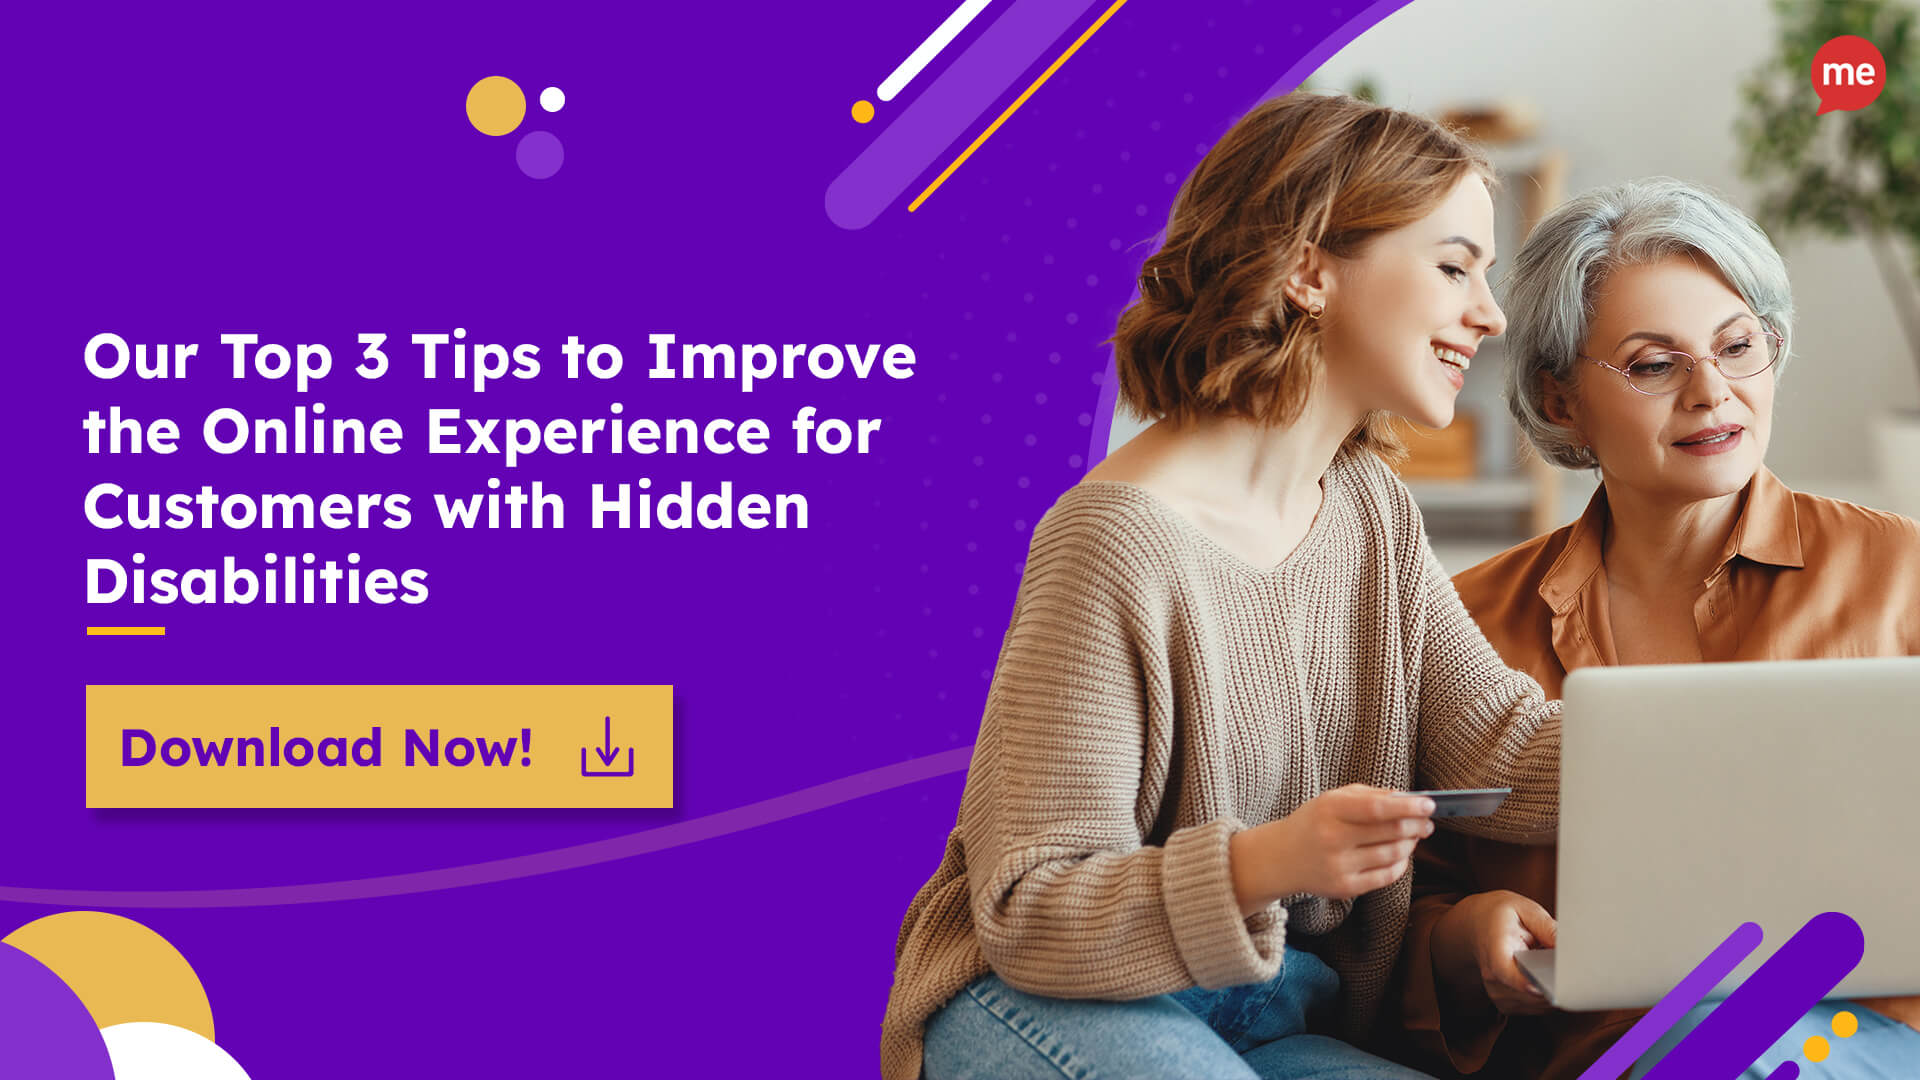 Our top 3 tips to improve the online experience for customers with hidden disabilities